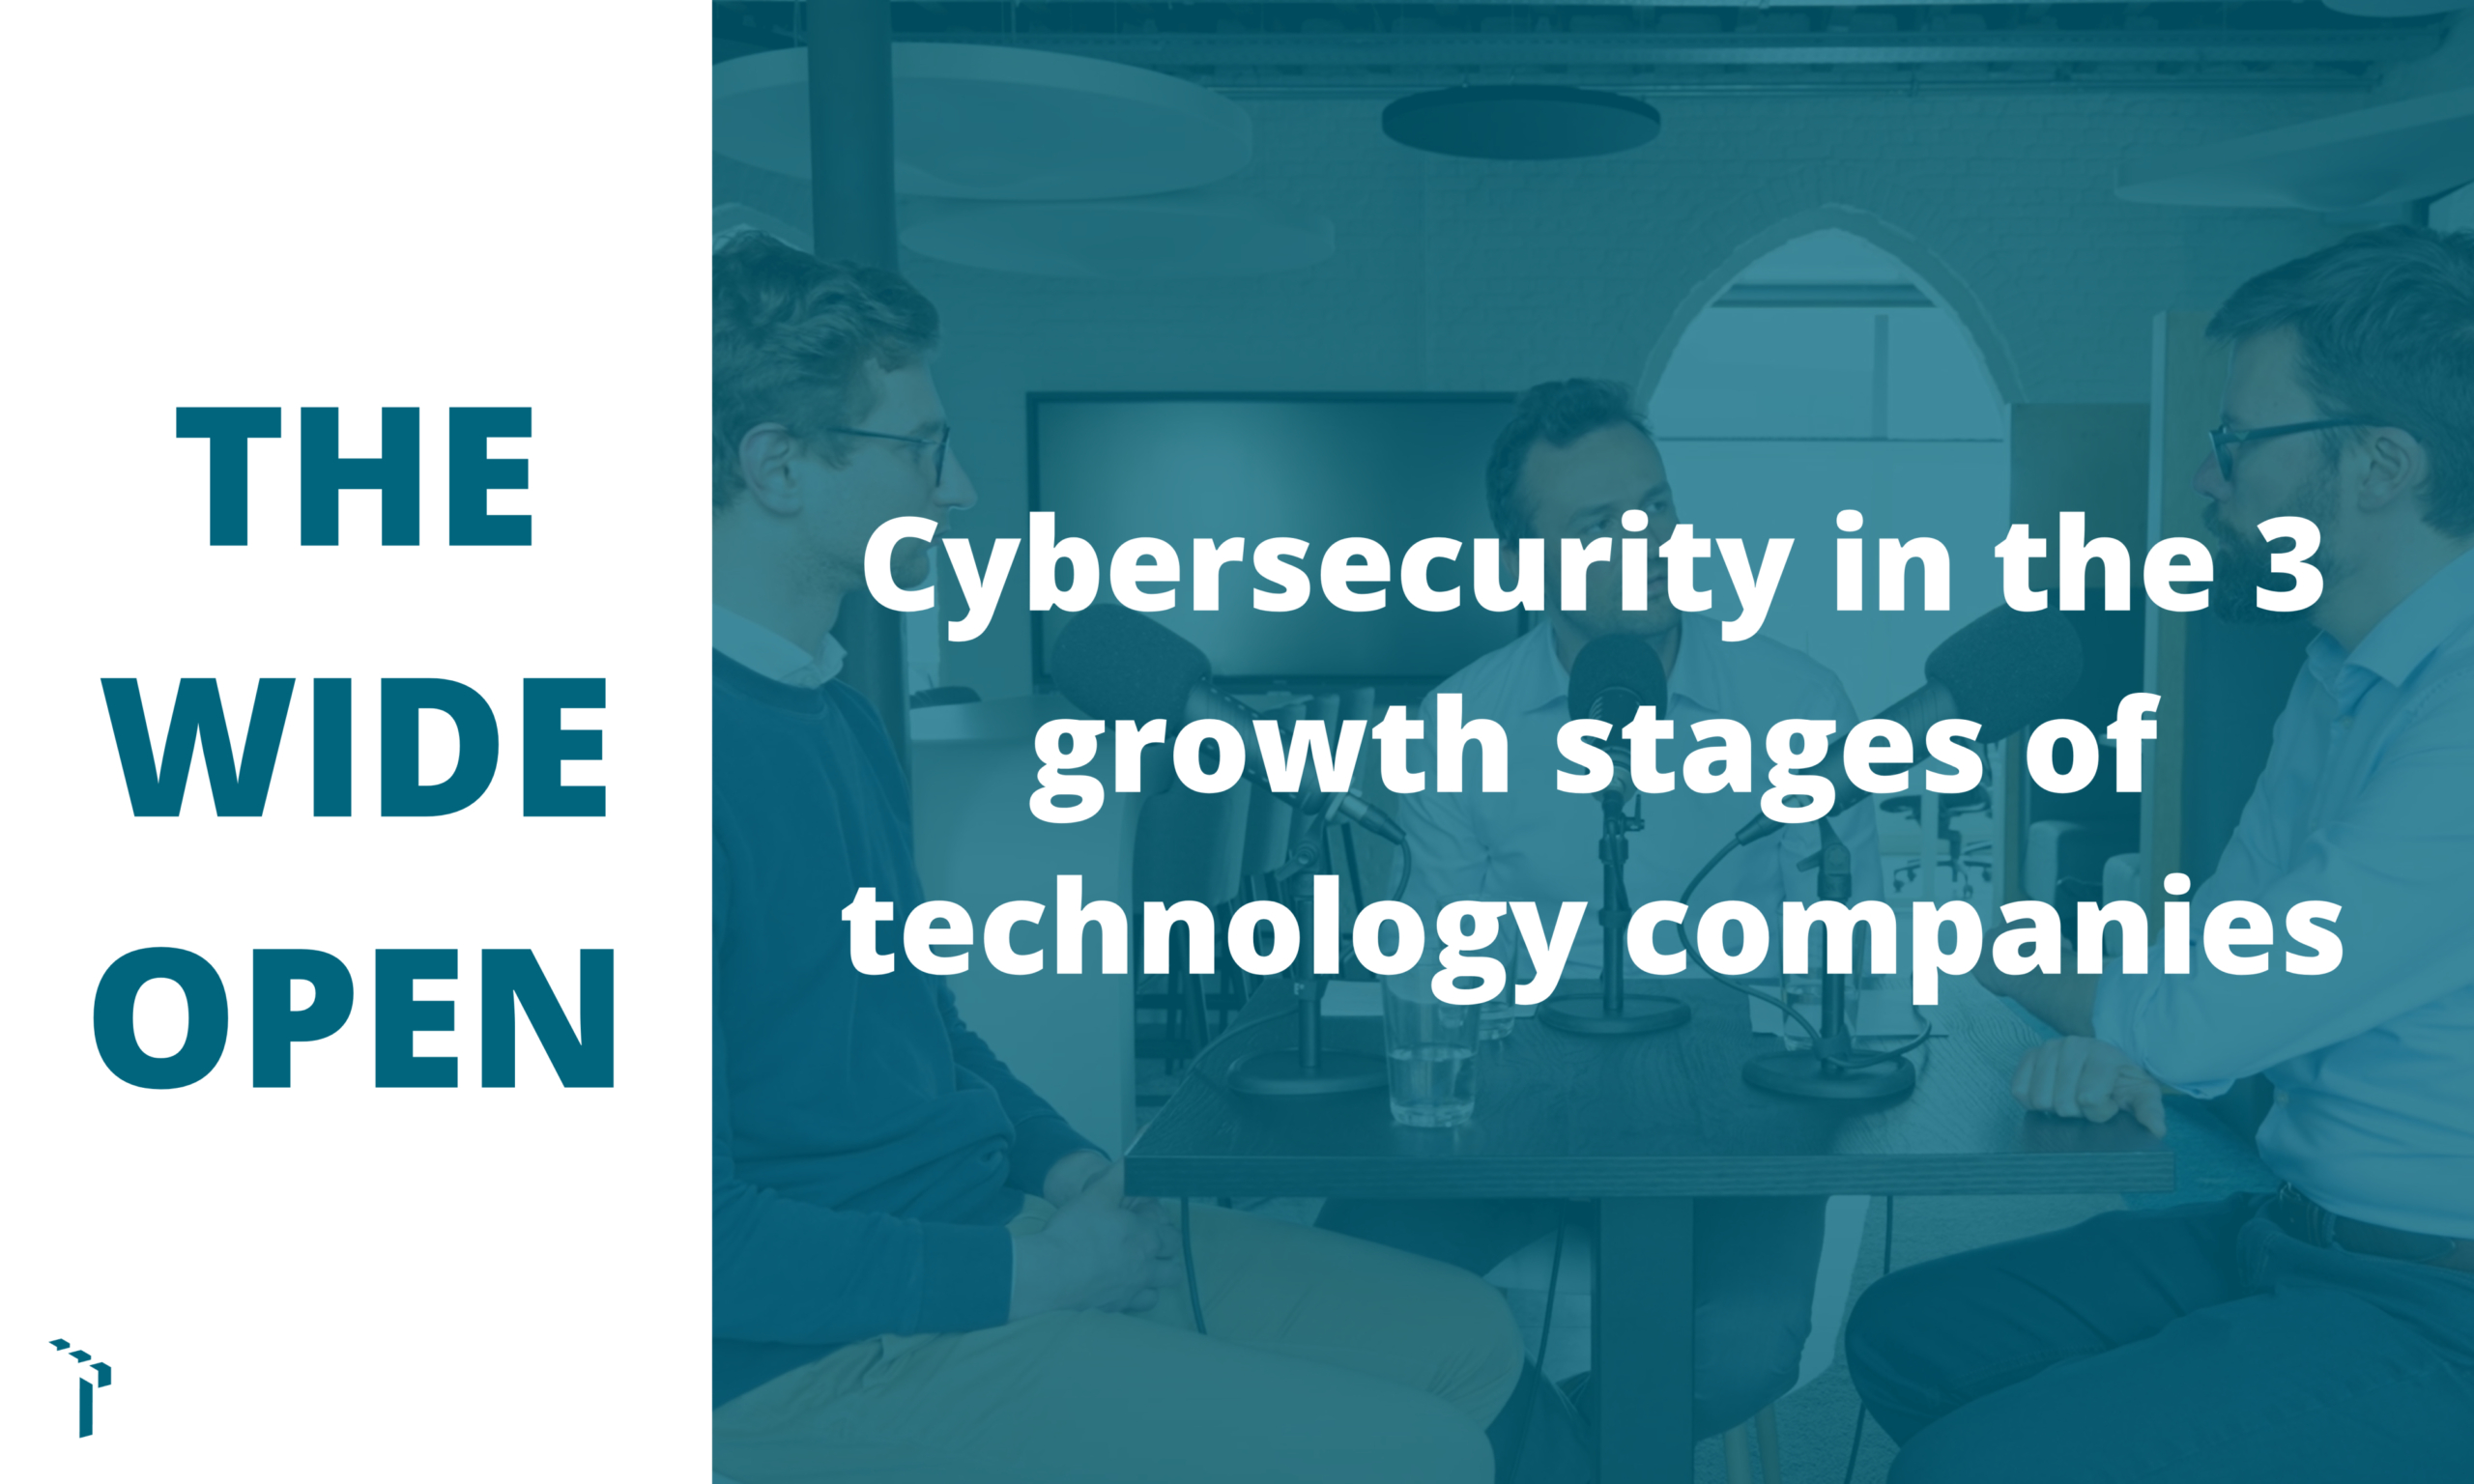 Cybersecurity in the 3 growth stages of technology companies